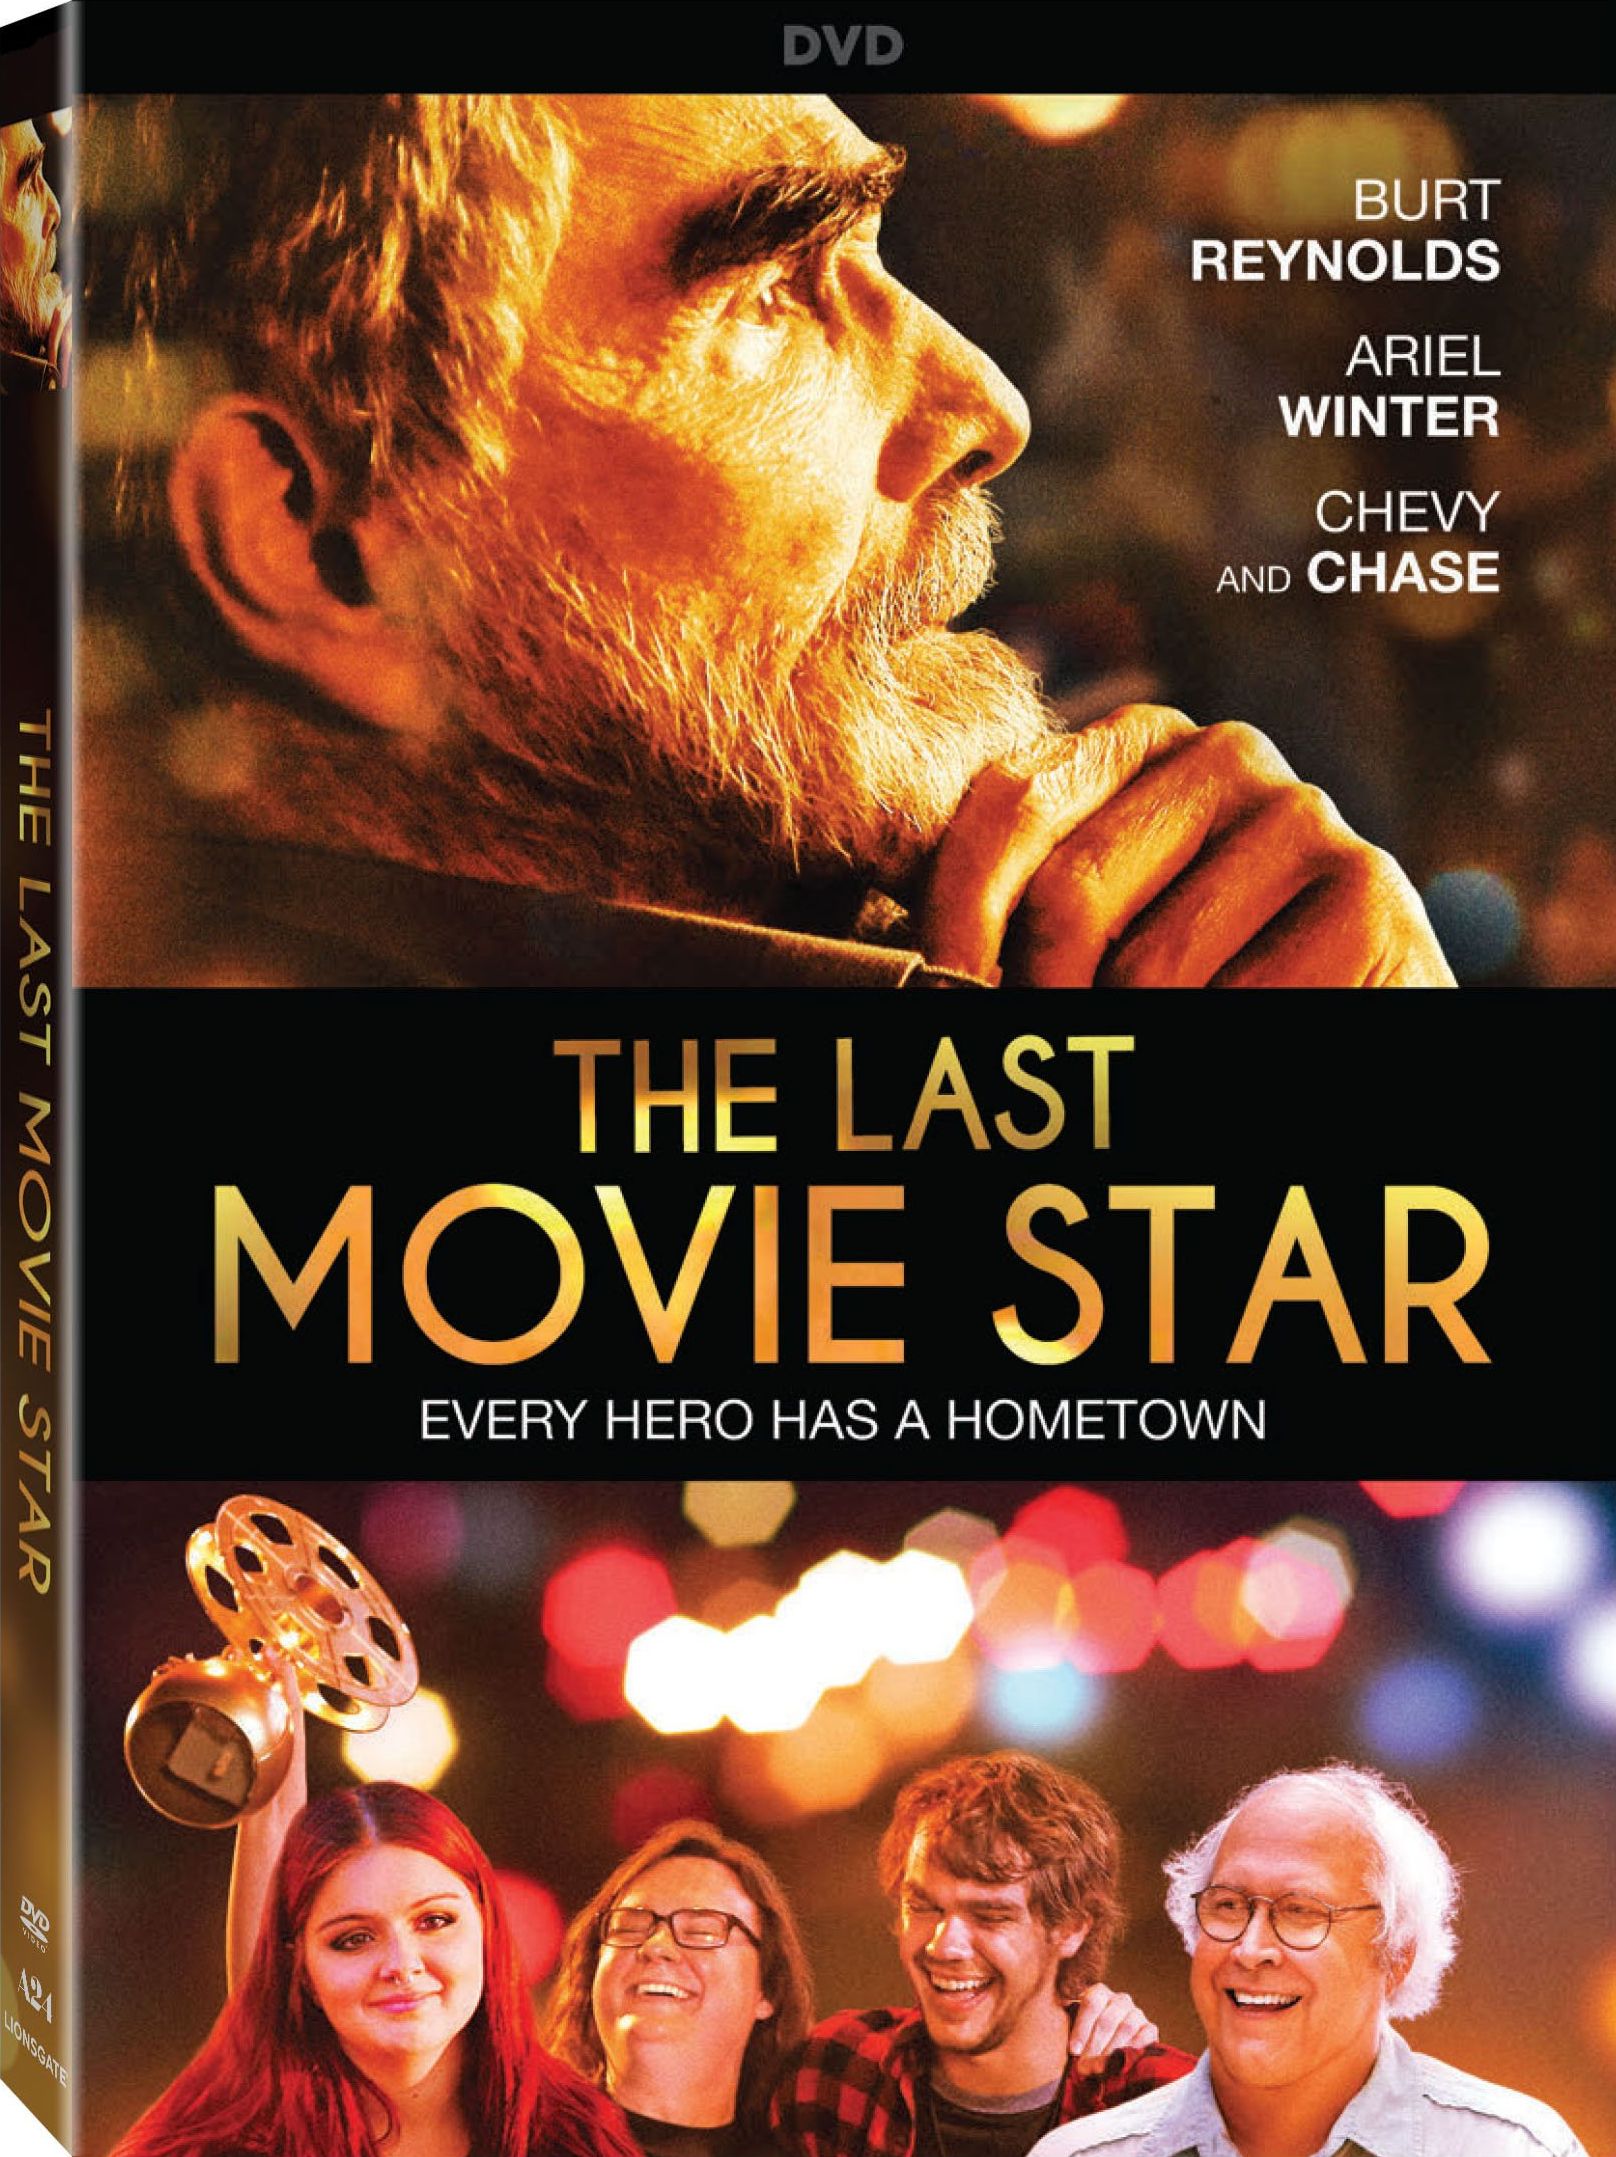  The Last Movie Star DVD Release Date March 27 2018